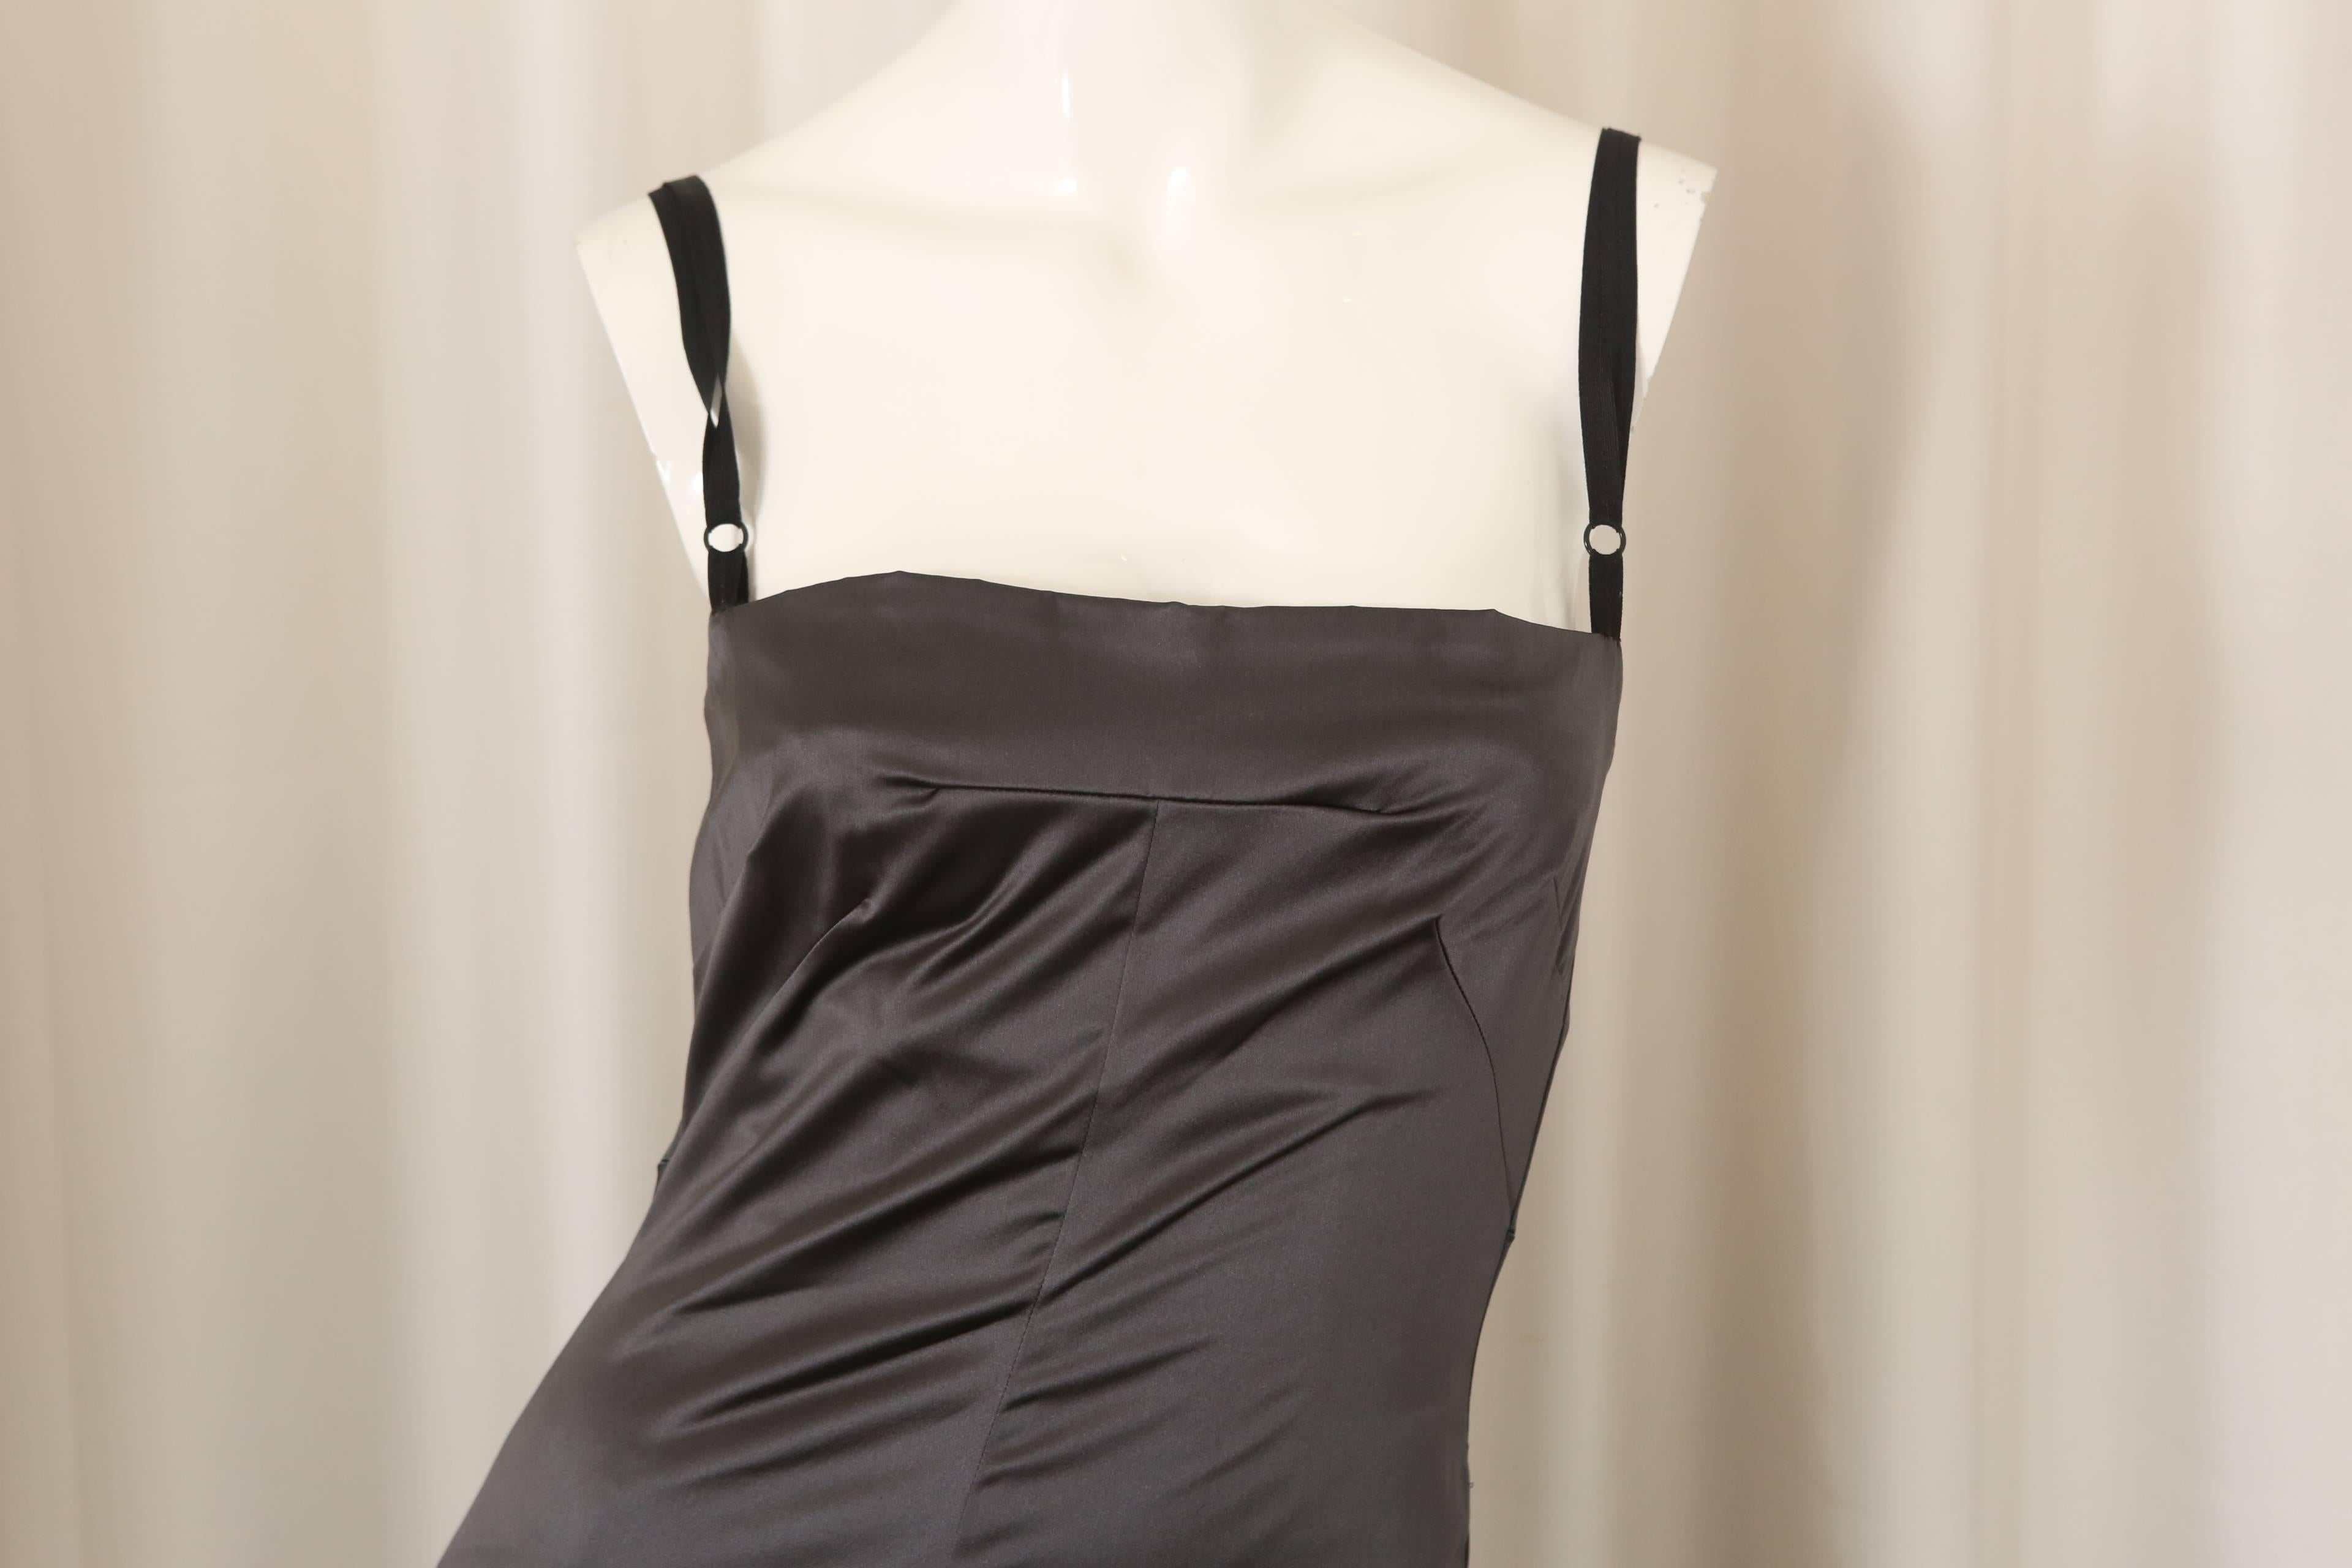 Dolce & Gabbana strapless black/grey mid-calf length dress with back slit and built in bustier bodysuit.  Hook & eye closure. 

